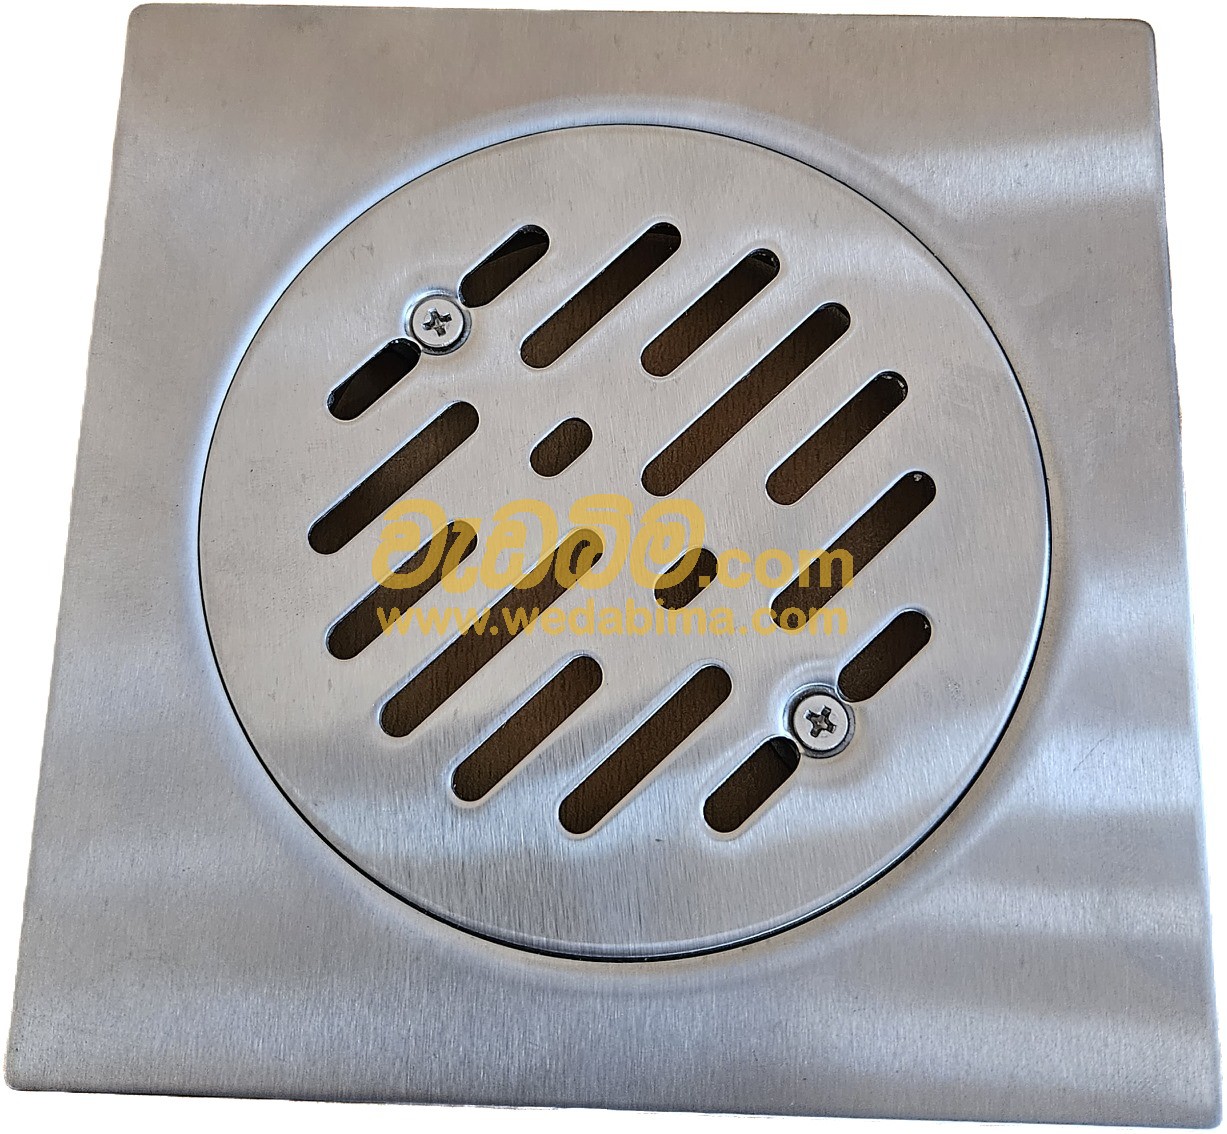 Stainless Steel Floor Drain Covers Price in Colombo